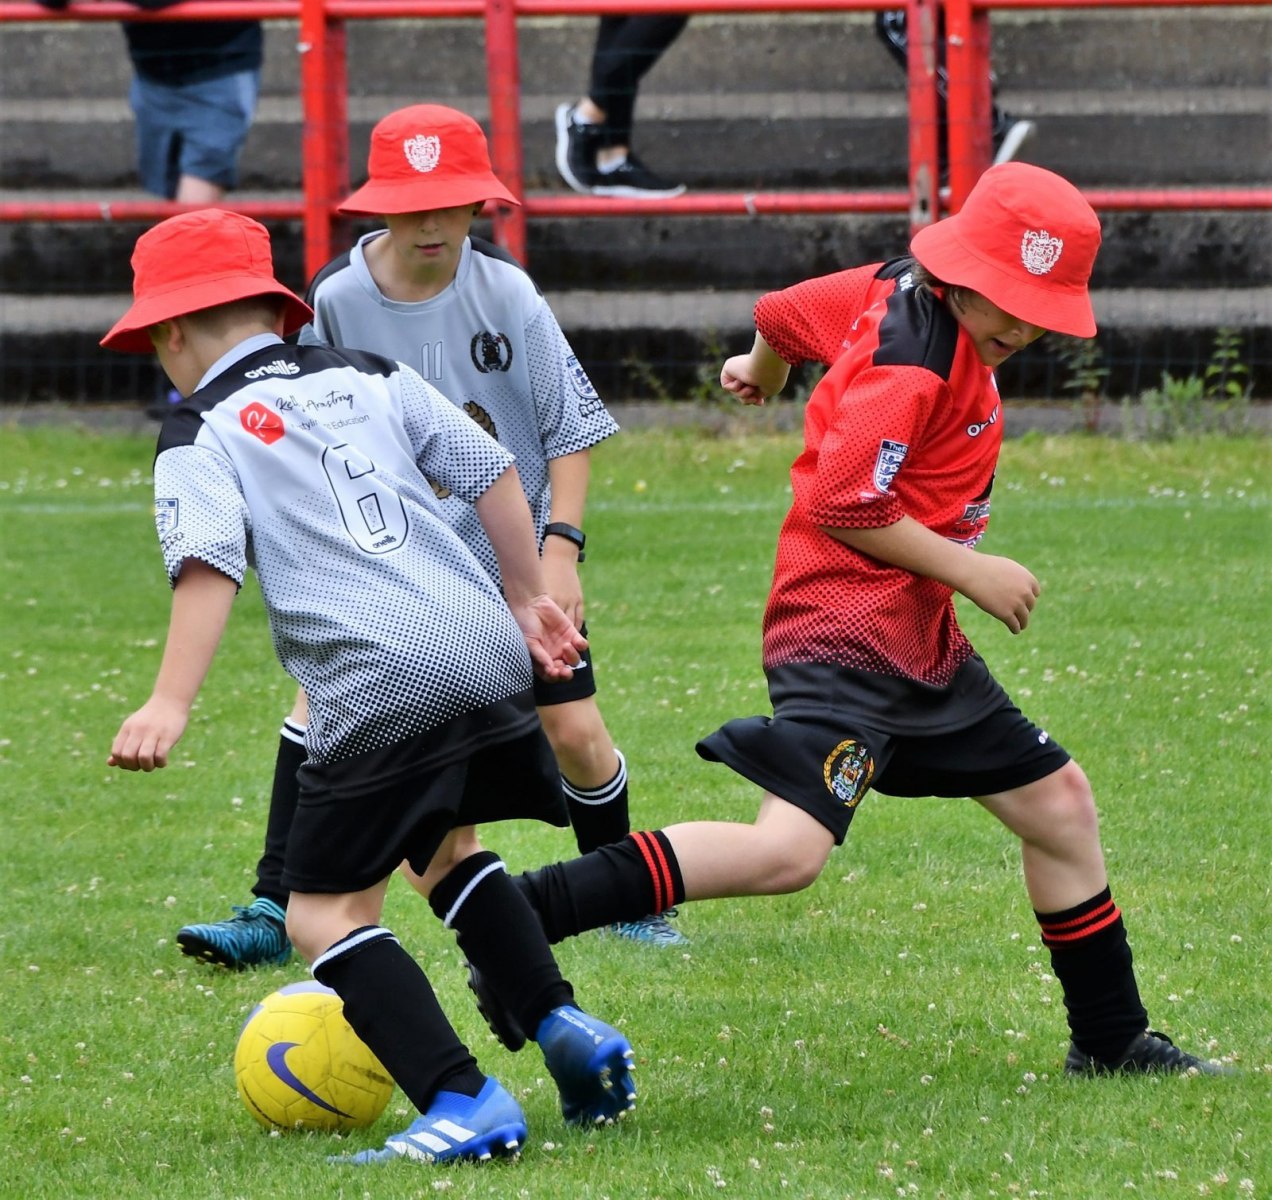 Reds Festival of Football – Juniors in action